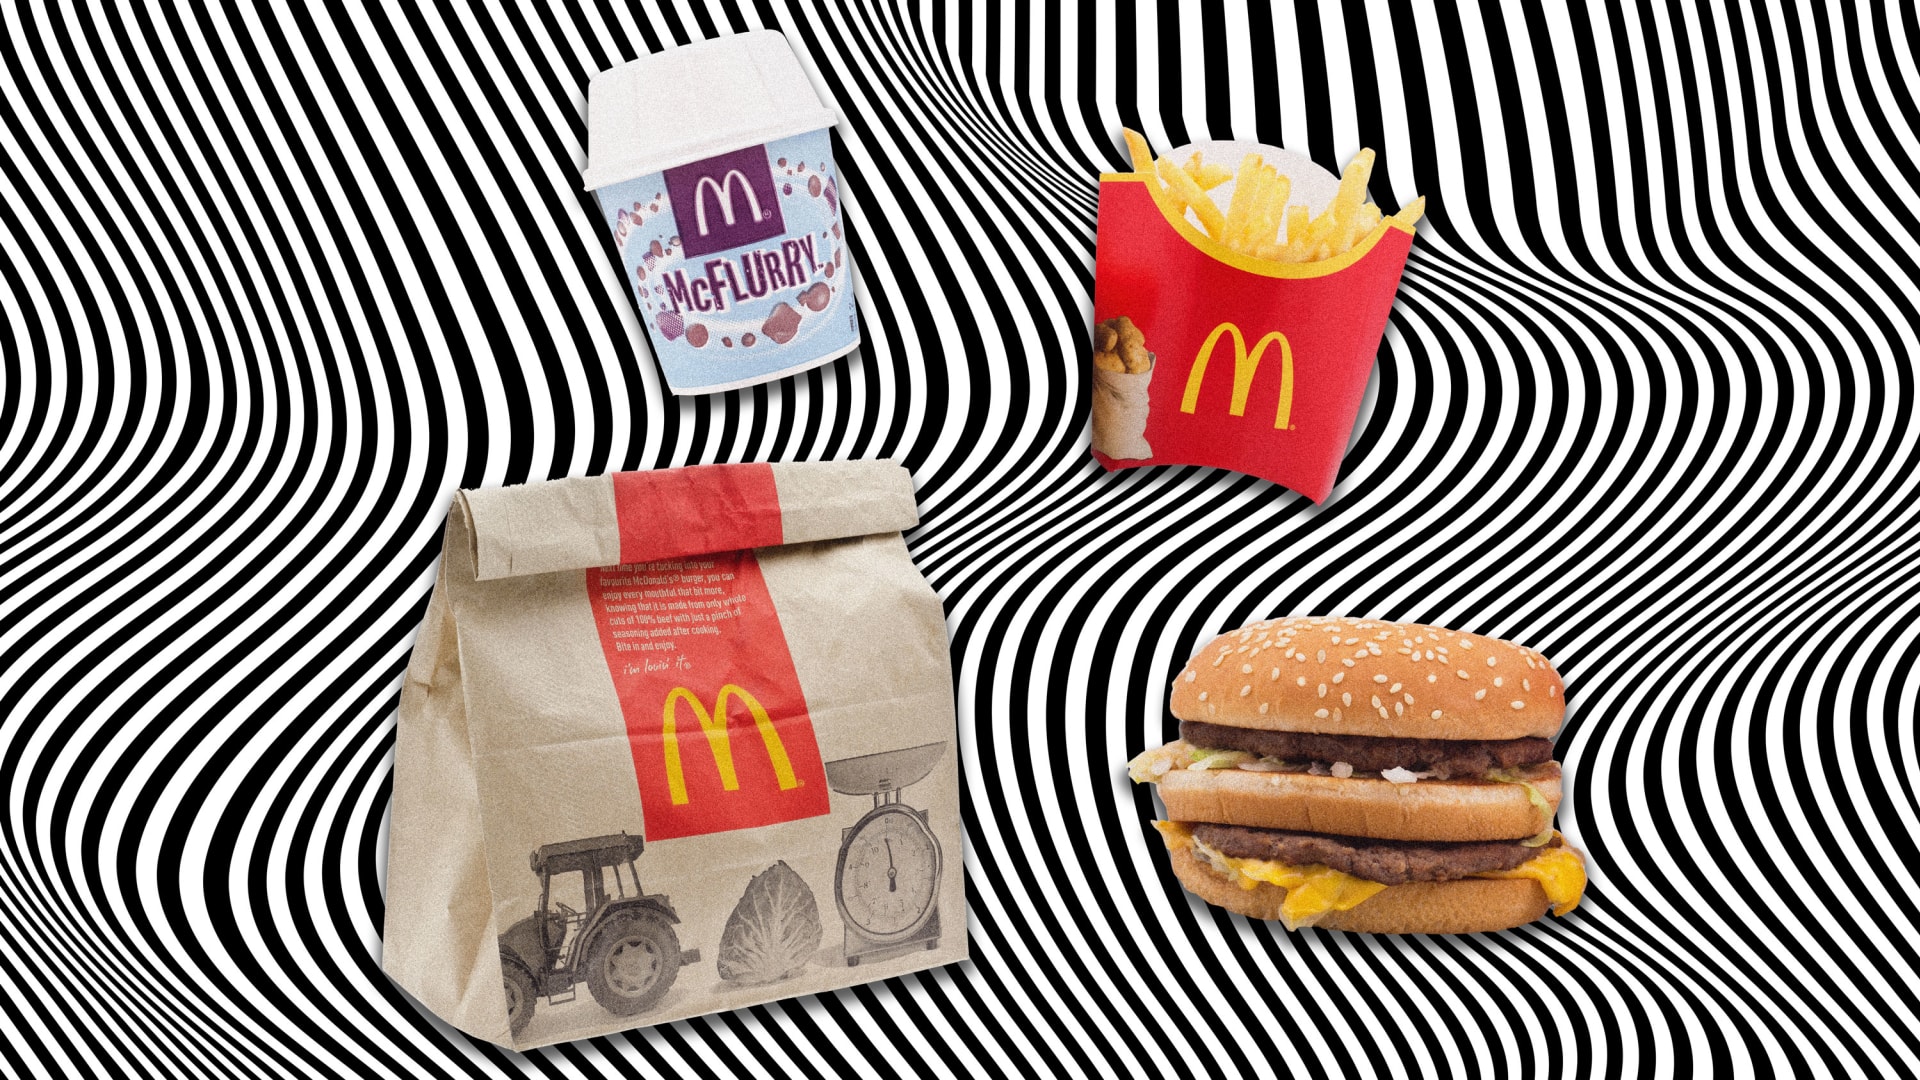 After 61 Years, McDonald's Just Revealed Some Big Plans That Nobody Could Have Predicted